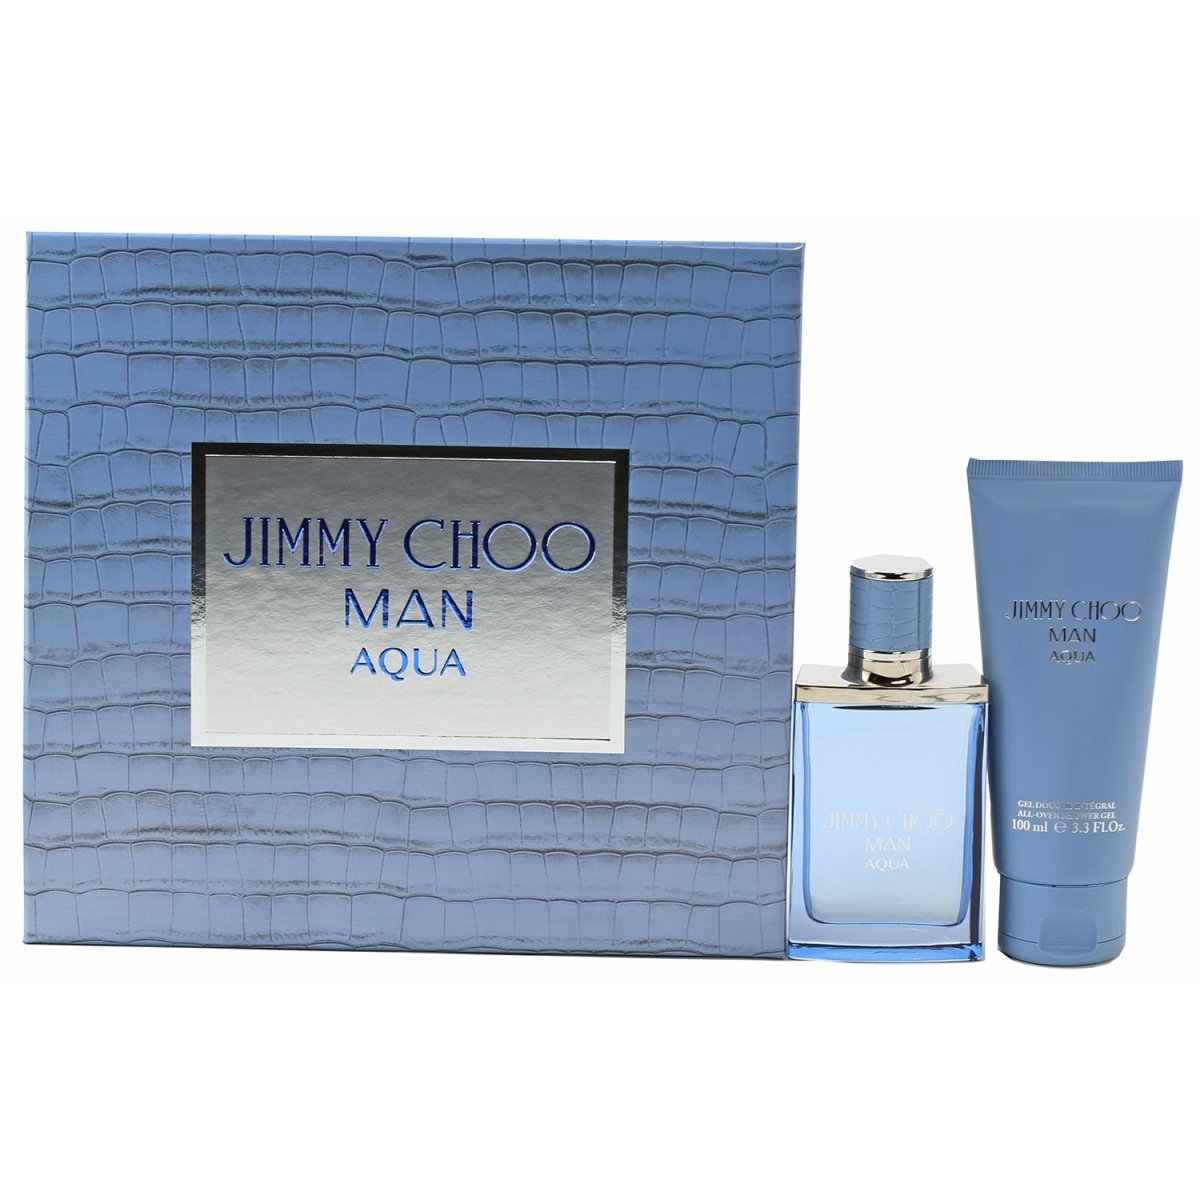 Picture of Jimmy Choo 22022760 Acqua Man Gift Set - 2 Piece